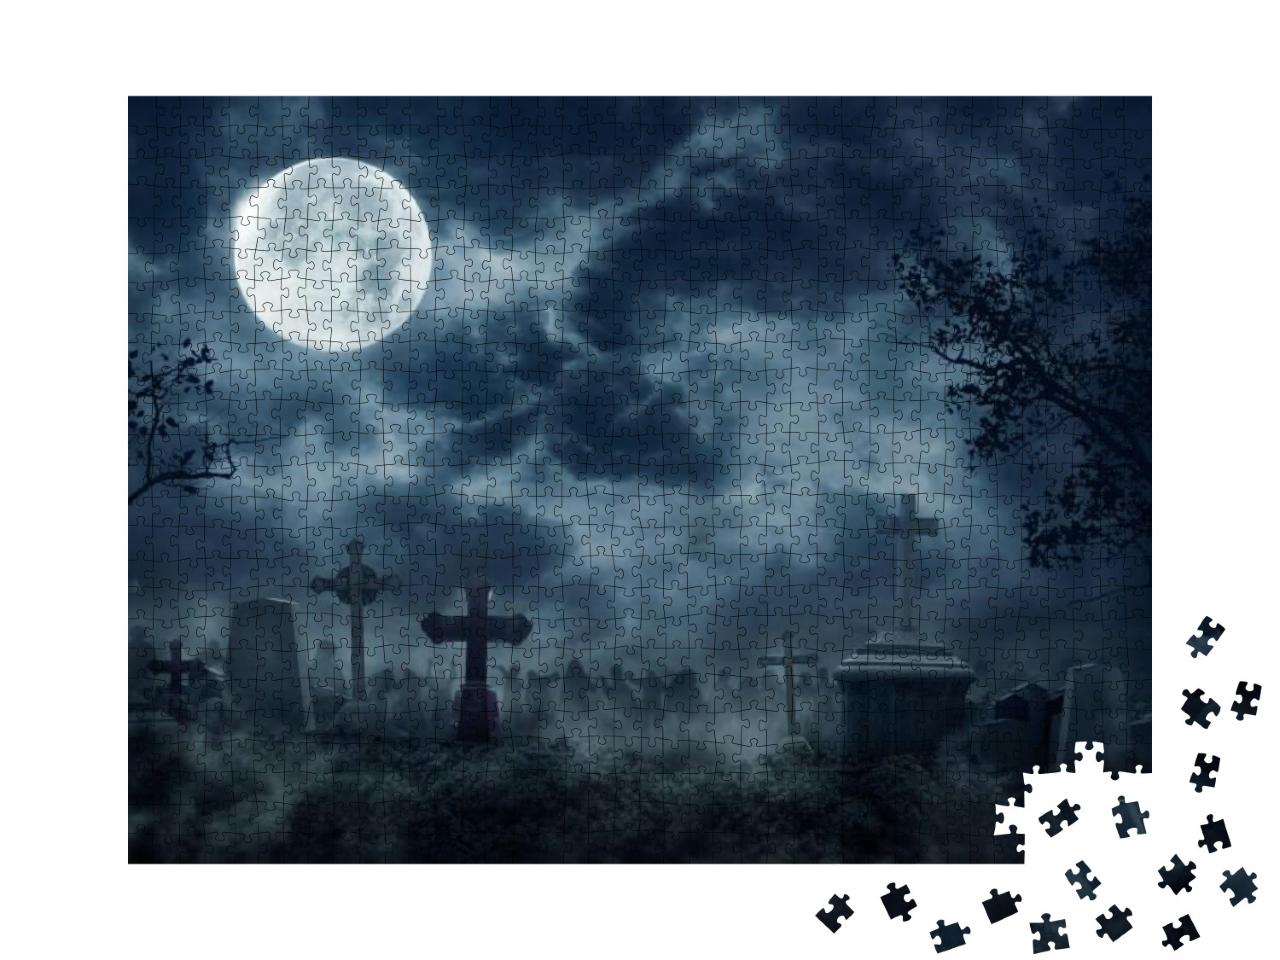 Zombie Rising Out of a Graveyard Cemetery in Spooky Dark... Jigsaw Puzzle with 1000 pieces